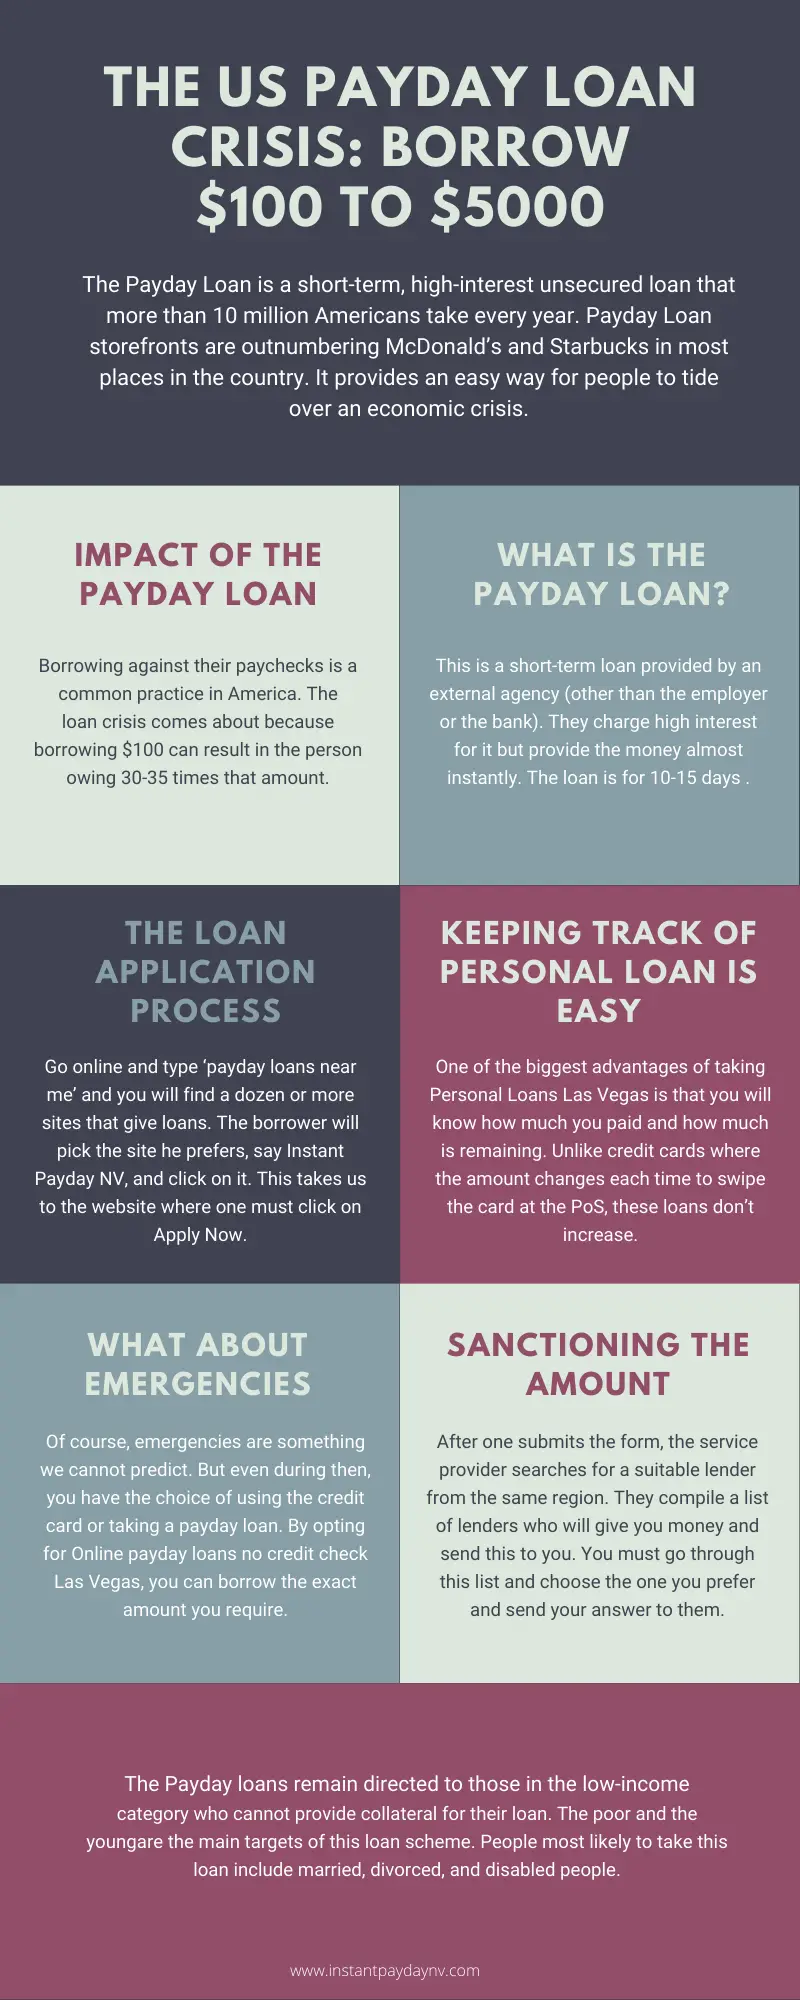 The US Payday Loan Crisis: Borrow $100 to $5000